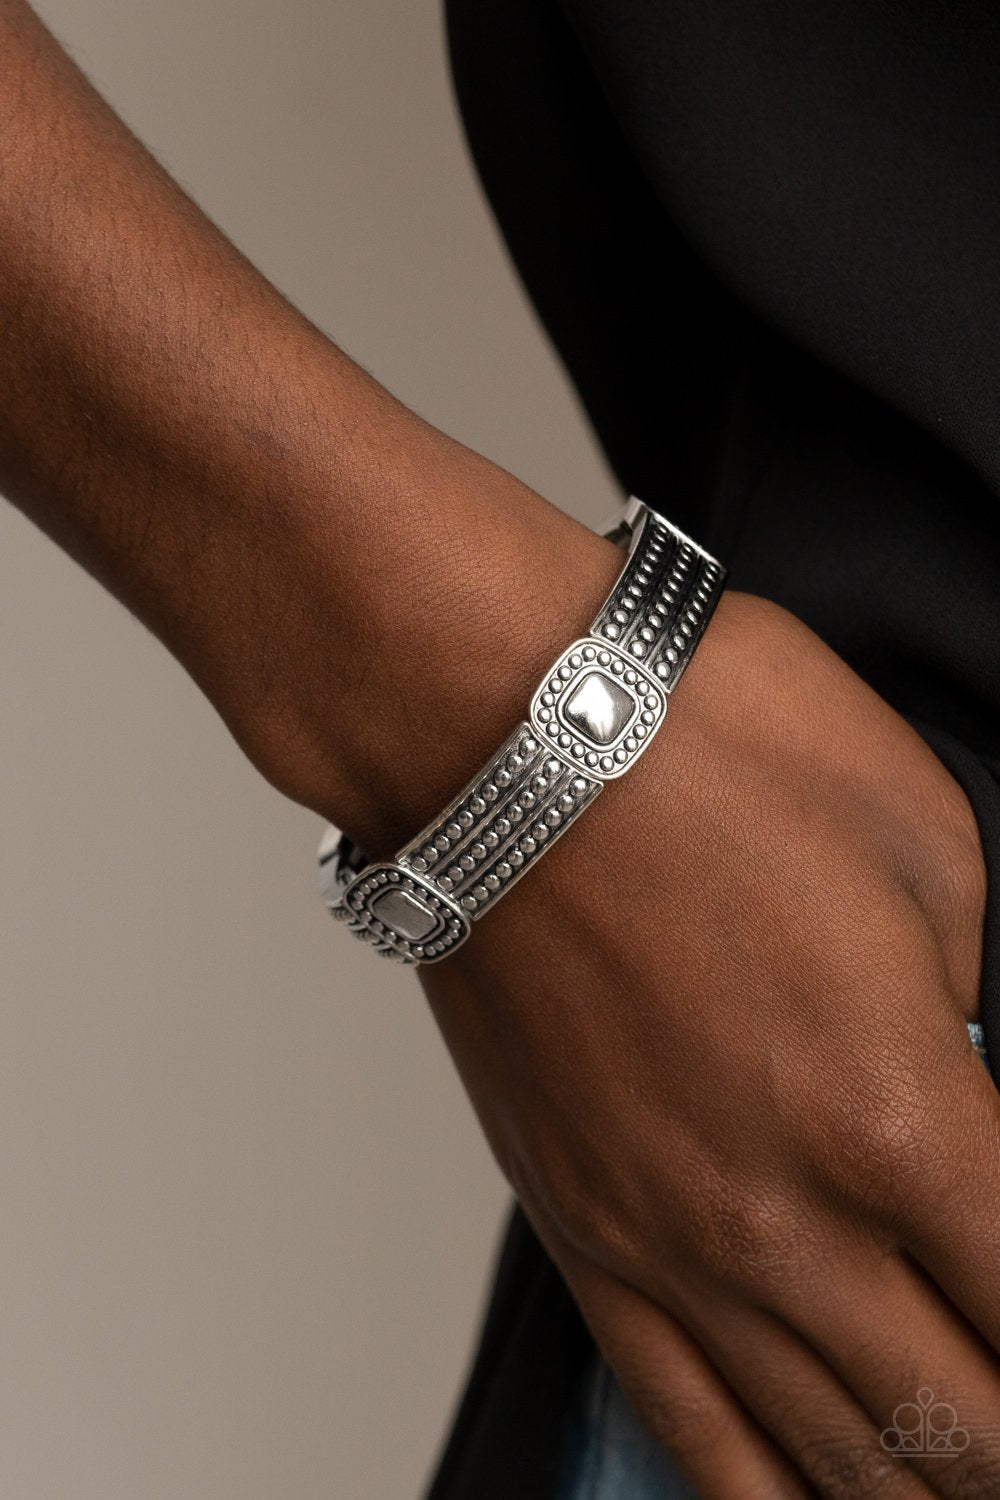 &lt;p&gt;Featuring silver studded patterns, square and rectangular frames are threaded along stretchy bands around the wrist for a rustic flair.&lt;/p&gt;
&lt;p&gt;&lt;i&gt; &lt;/i&gt;&lt;/p&gt;
&lt;div style=\&quot;text-align: center;\&quot;&gt;&lt;b&gt; &lt;/b&gt;&lt;/div&gt;